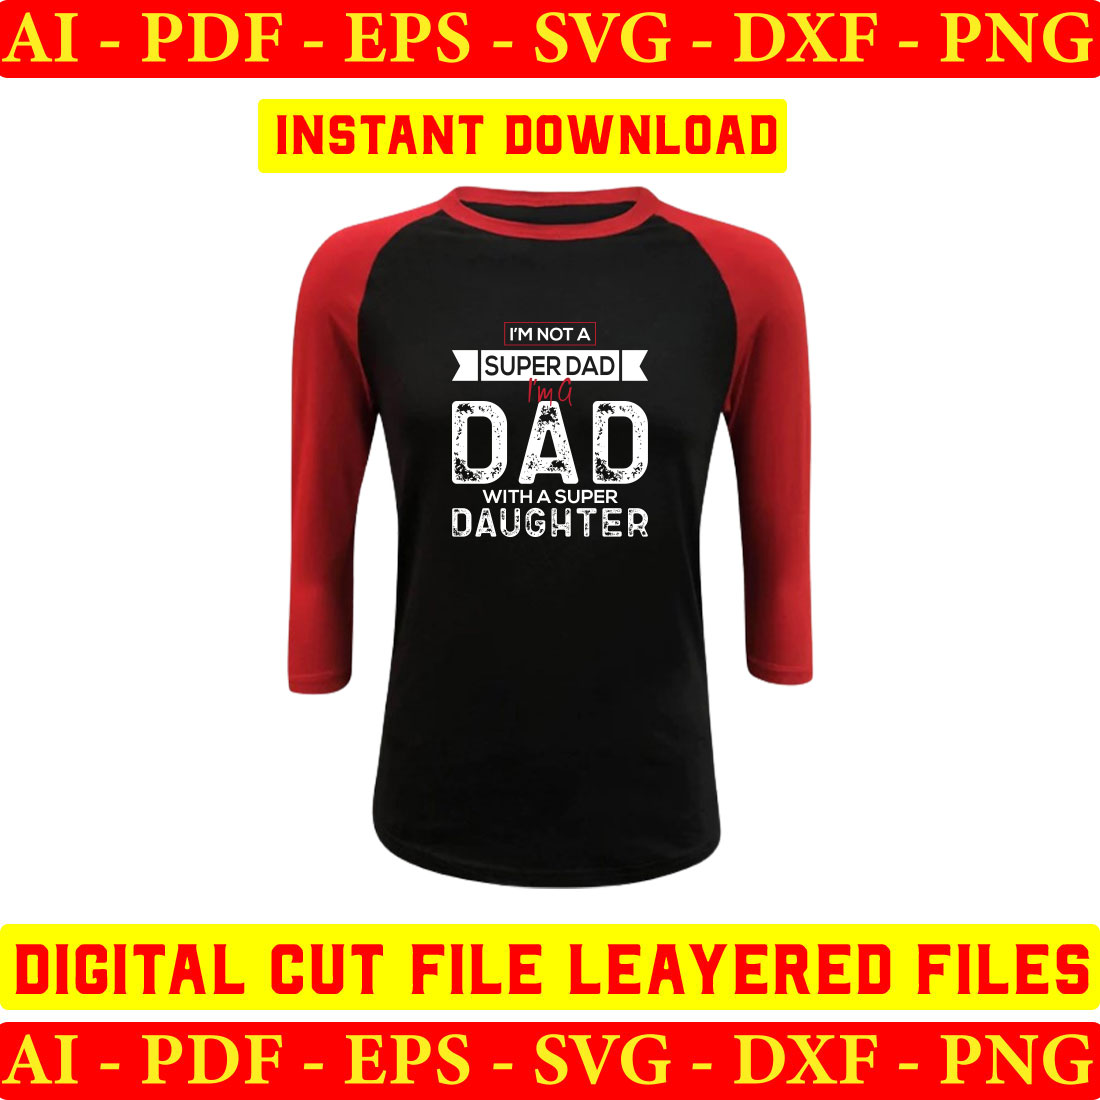 Black and red baseball shirt with the words dad daughter on it.